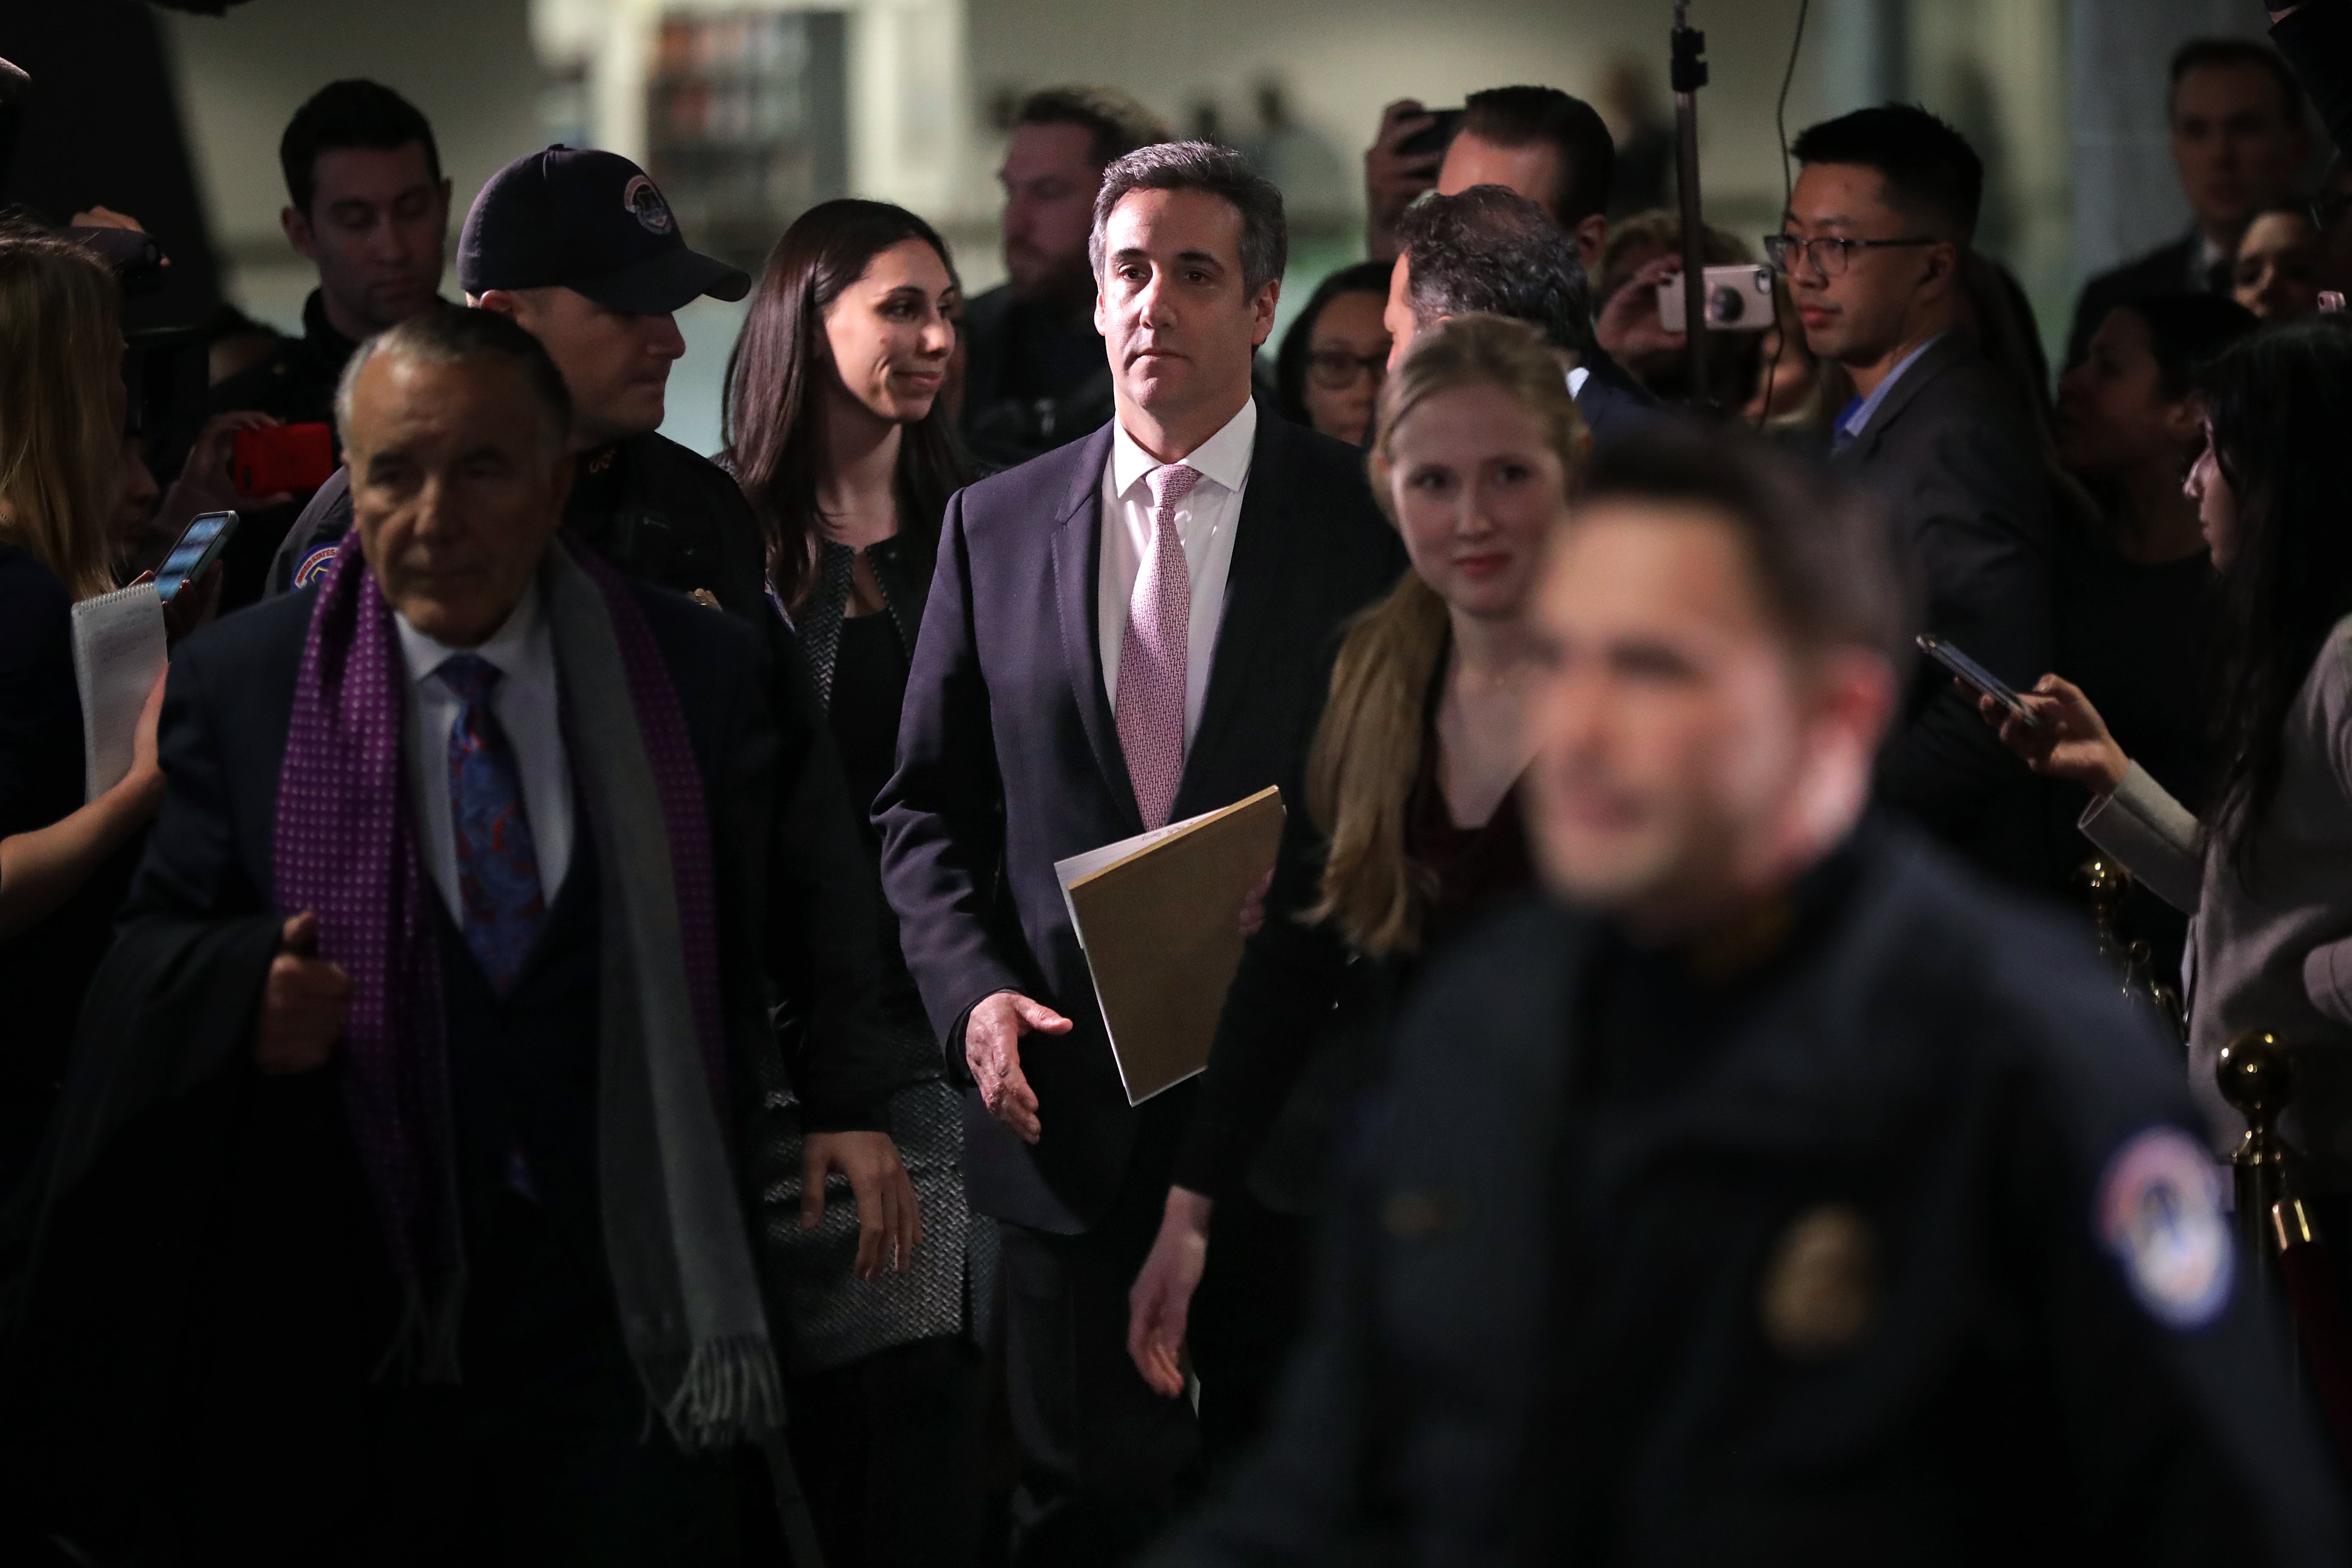 Cohen, walking, is surrounded by a crowd of people.